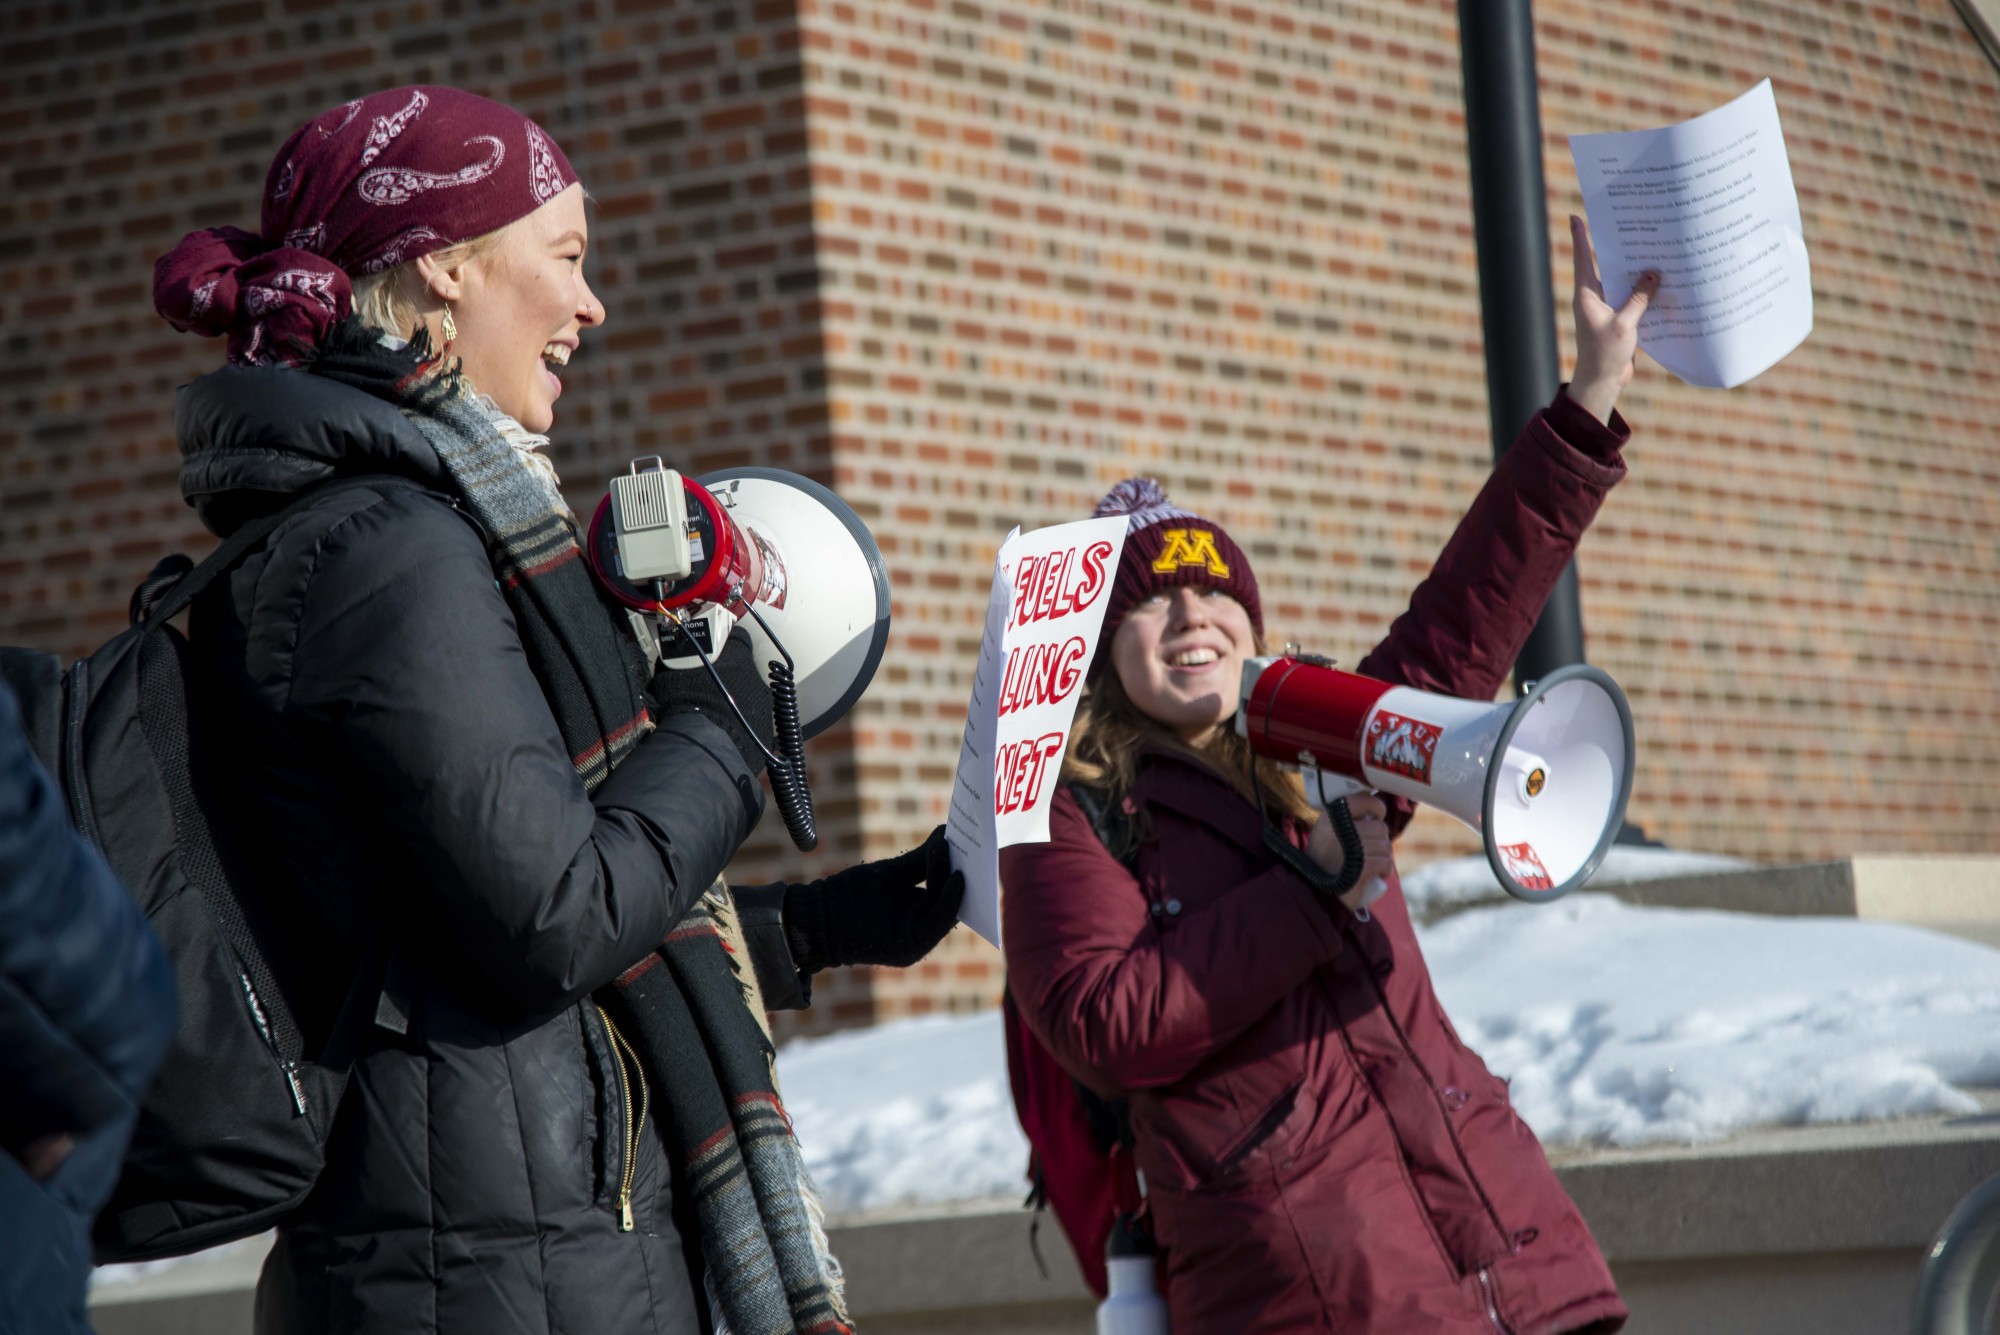 Savannah Wery, right, and Katherine Schmid, left, speak to protesters participating in the UMN Climate Strike outside of Coffman Union on Friday, Dec. 6. Those in attendance criticized the University’s policies on fossil fuel usage.